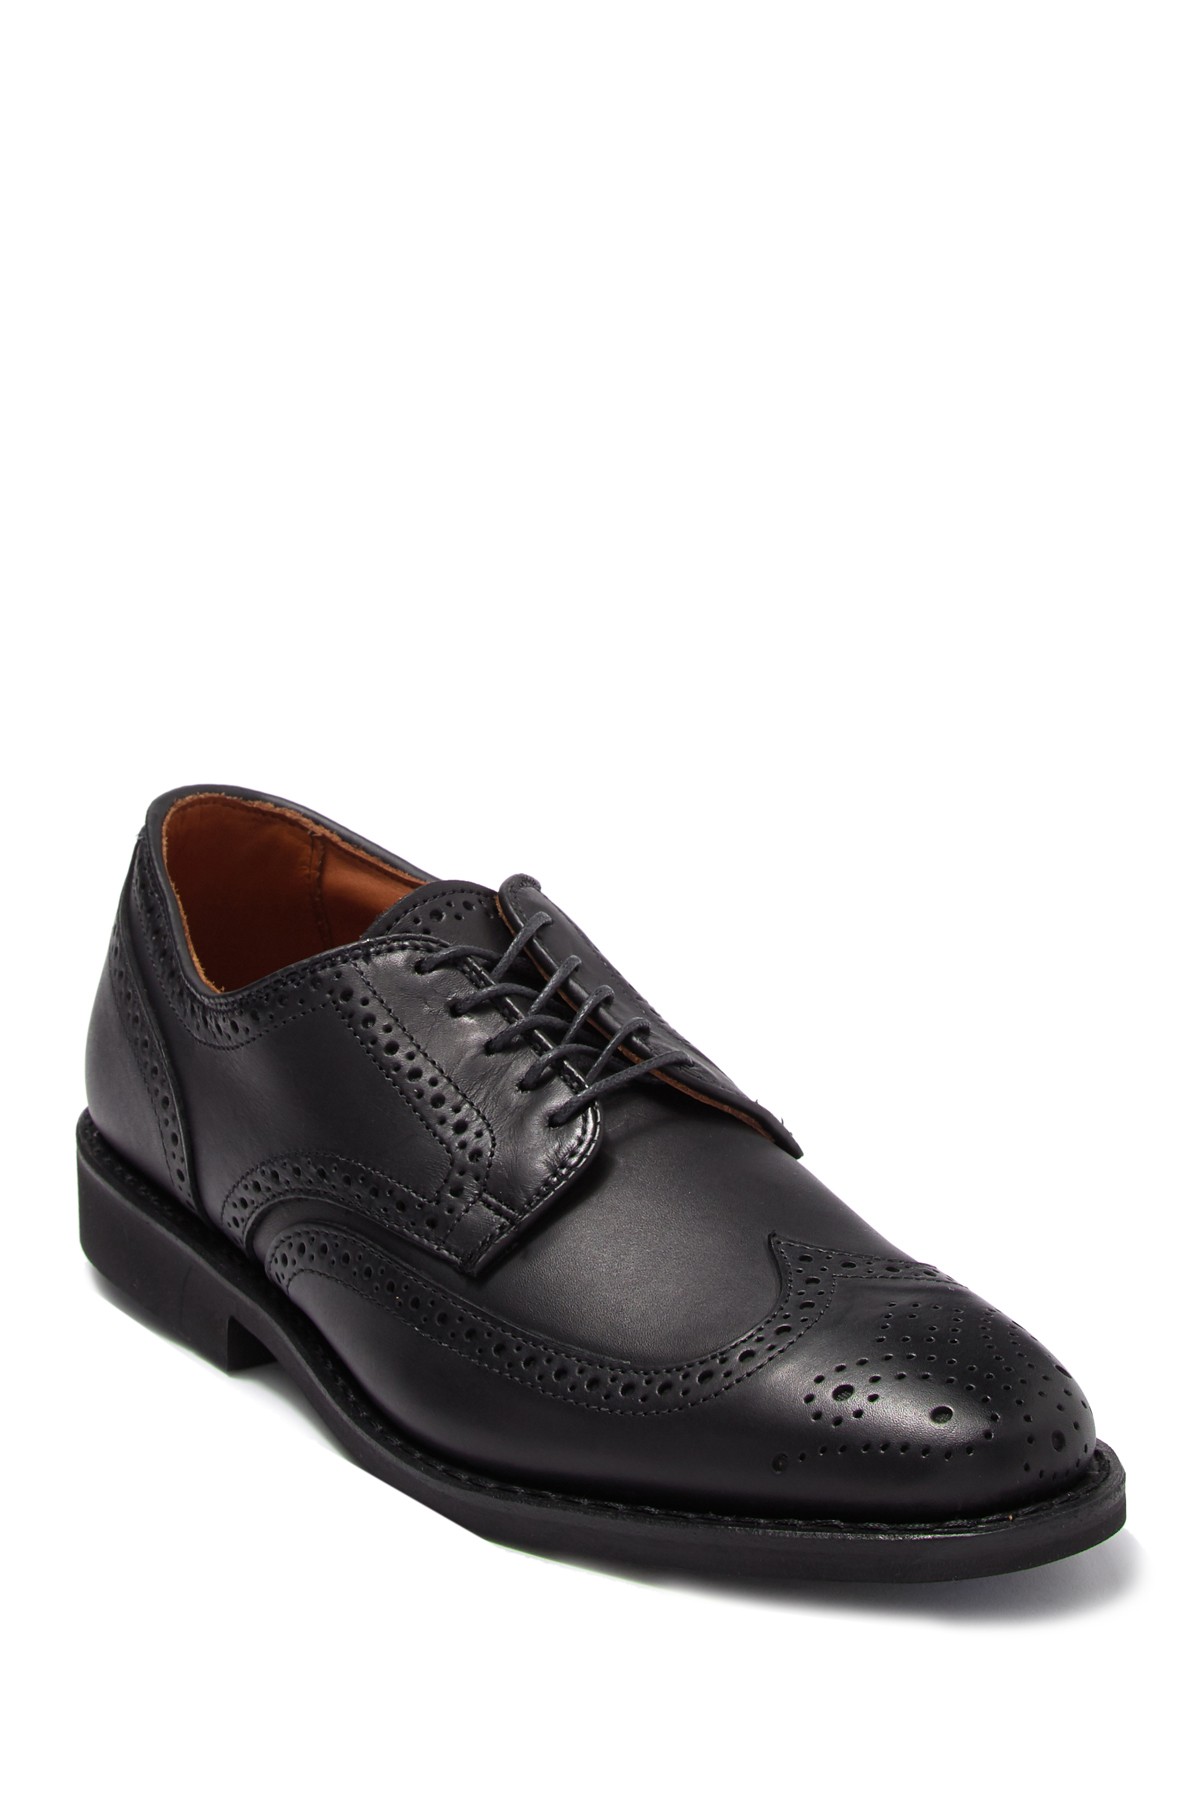 nordstrom rack mens casual shoes